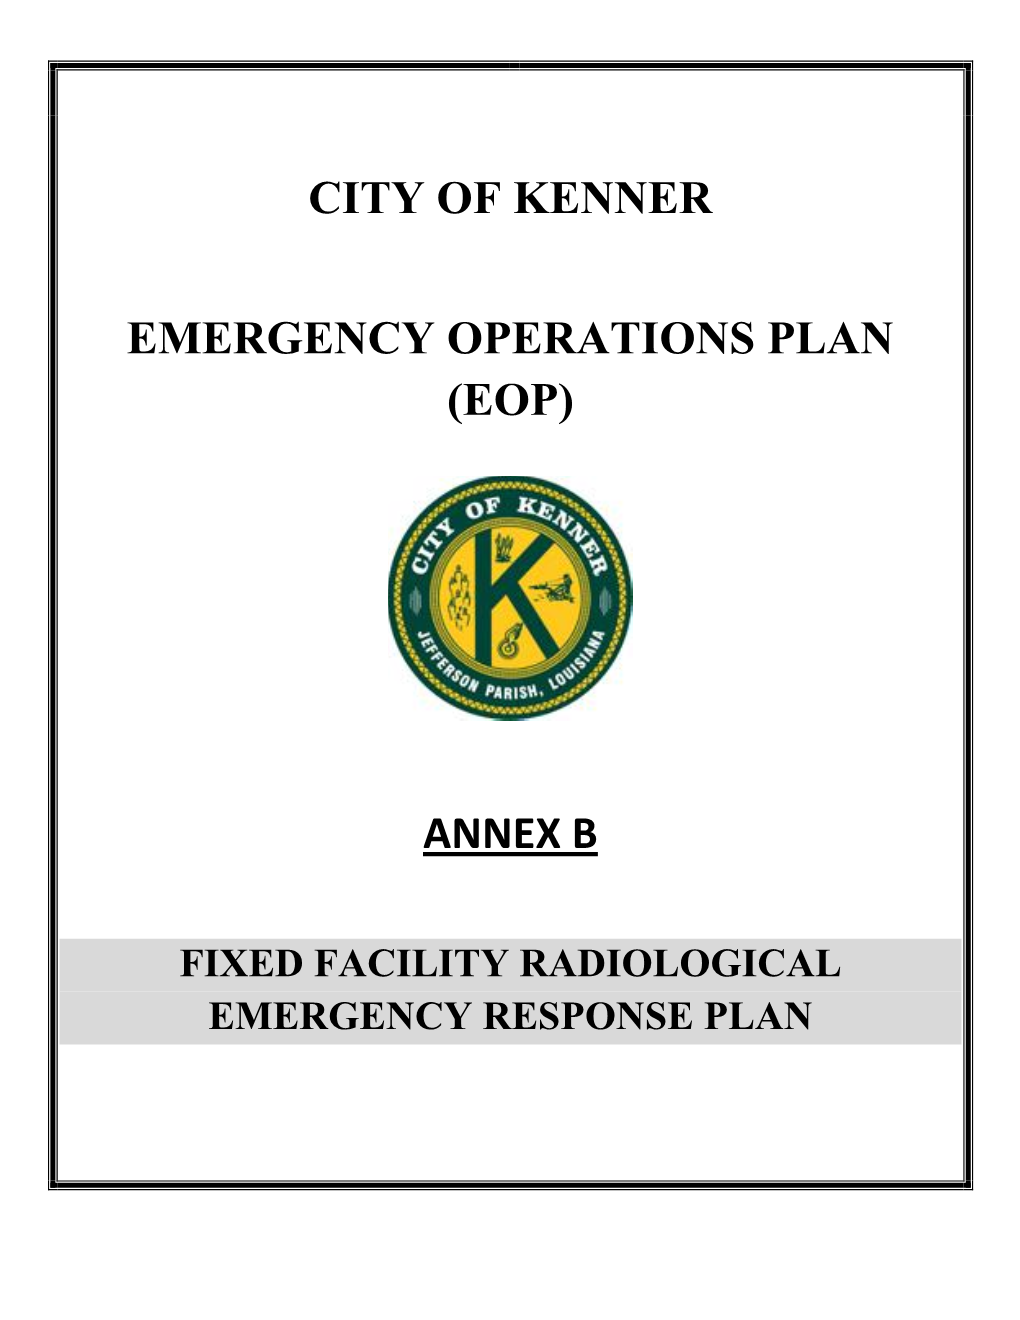 City of Kenner Emergency Operations Plan (Eop) Annex B